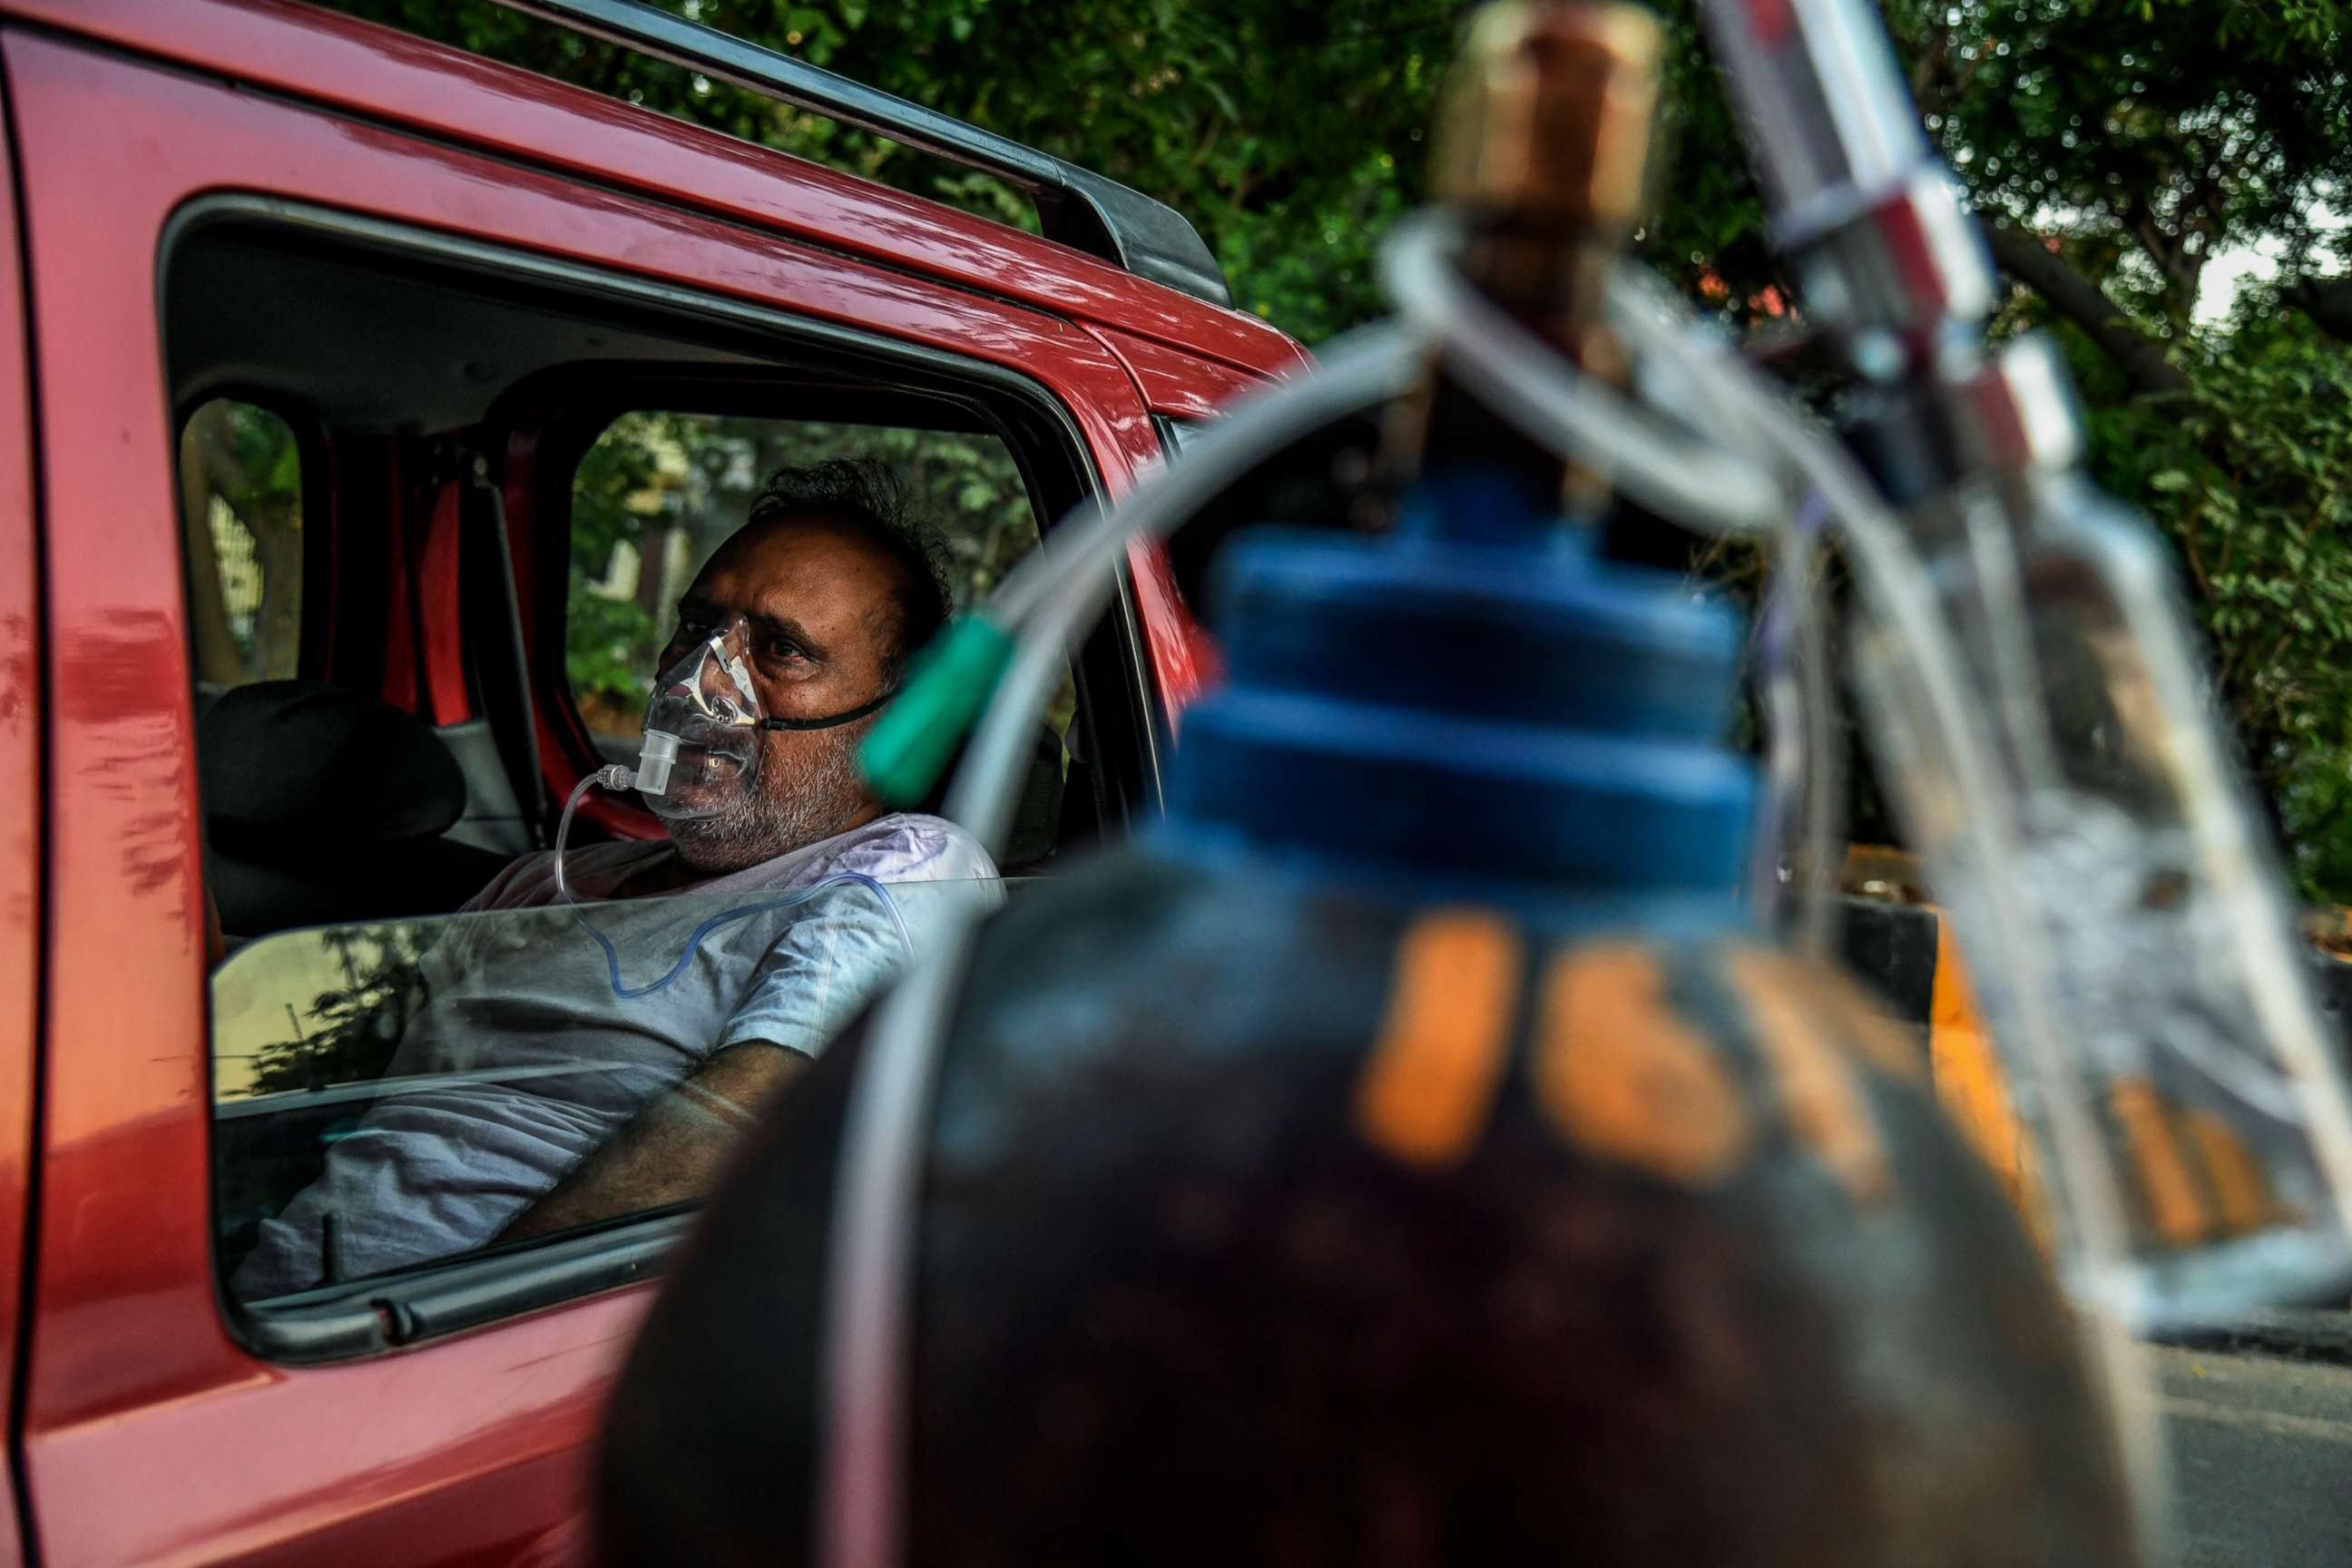 PHOTO: A man receives oxygen in a vehicle at a Sikh gurdwara (temple) in Delhi, April 25, 2021.